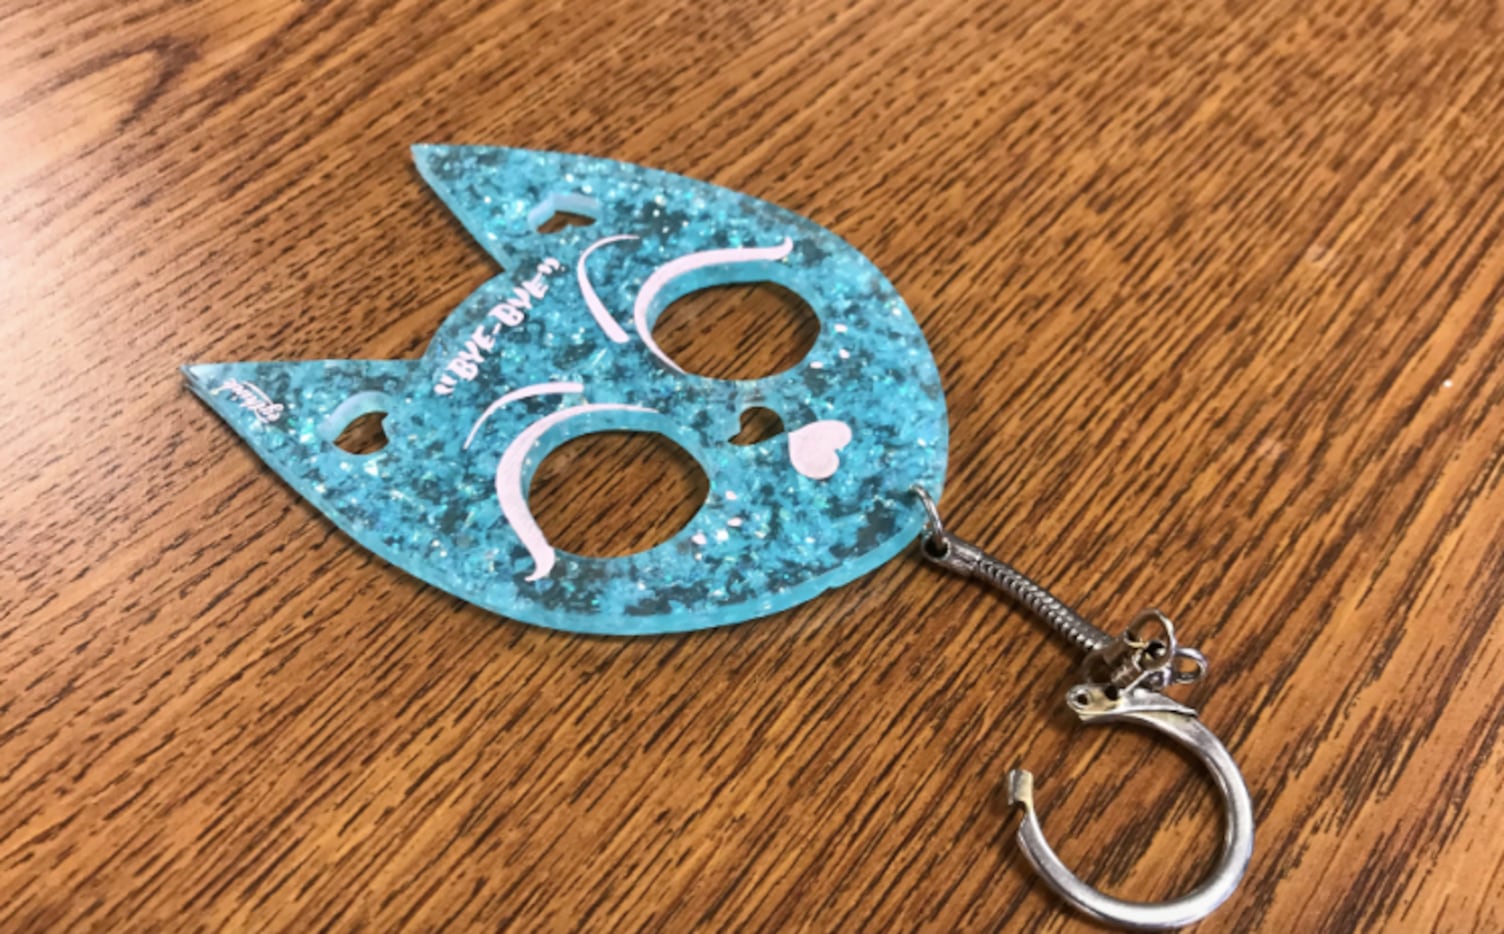 Texas woman won't face charges for carrying kitty key chain after